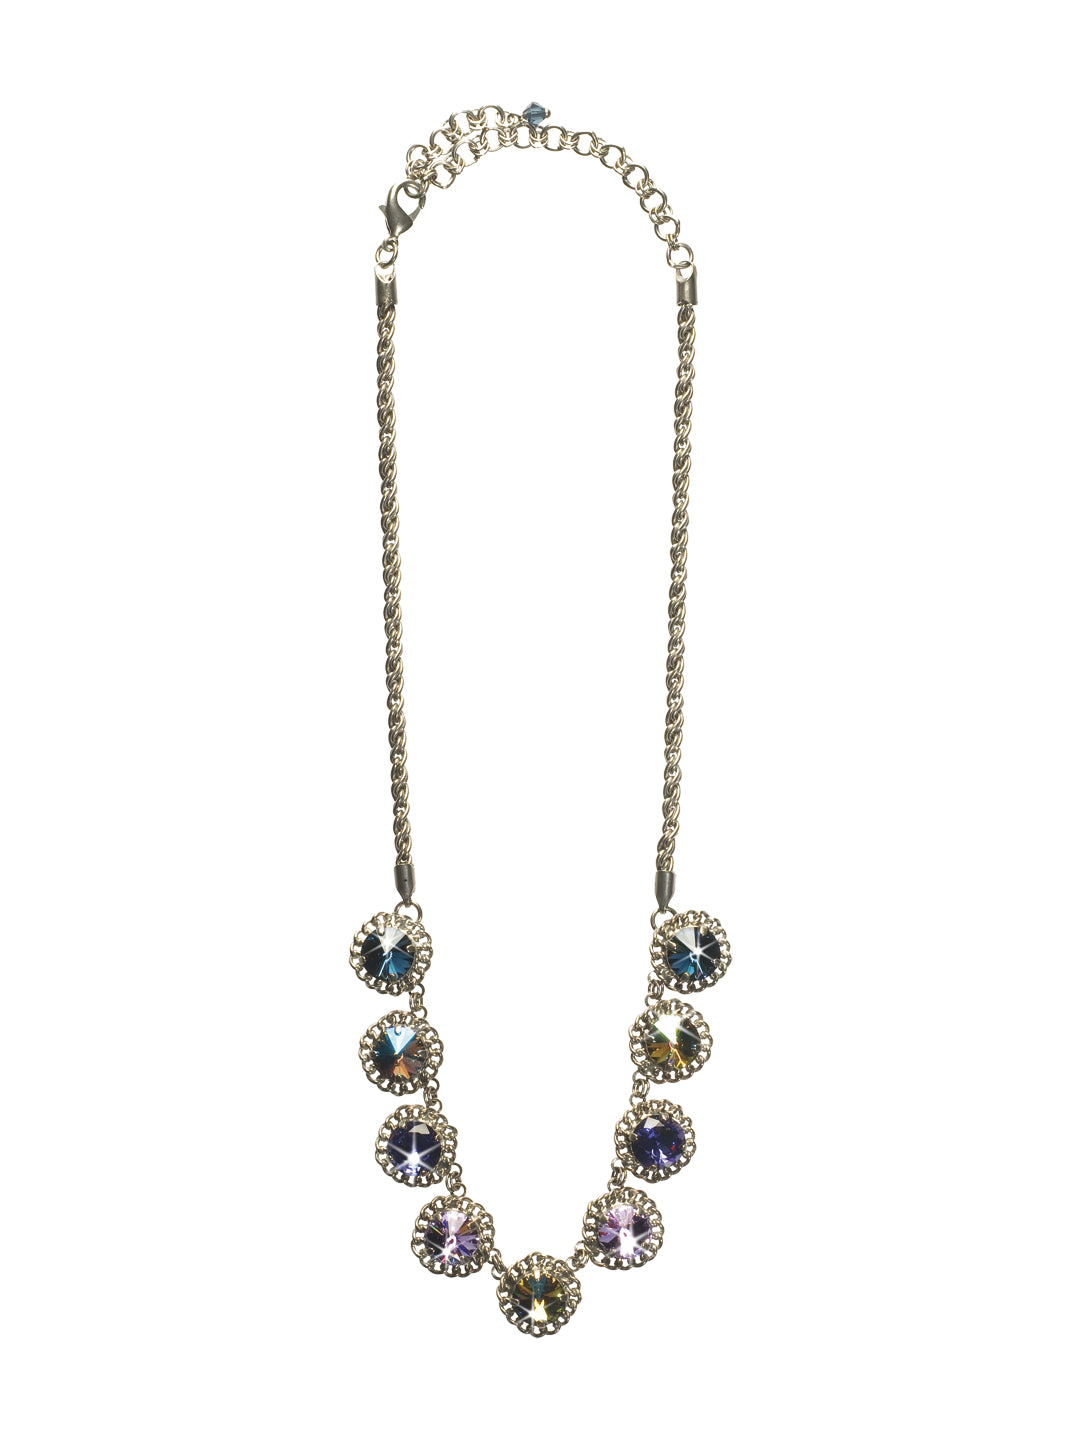 Roped In Statement Necklace - NCN1ASHY - One strand and you'll be roped in. Go back to the basics with this necklace of crystals, in a vintage inspired setting that will add glamour to any look. From Sorrelli's Hydrangea collection in our Antique Silver-tone finish.